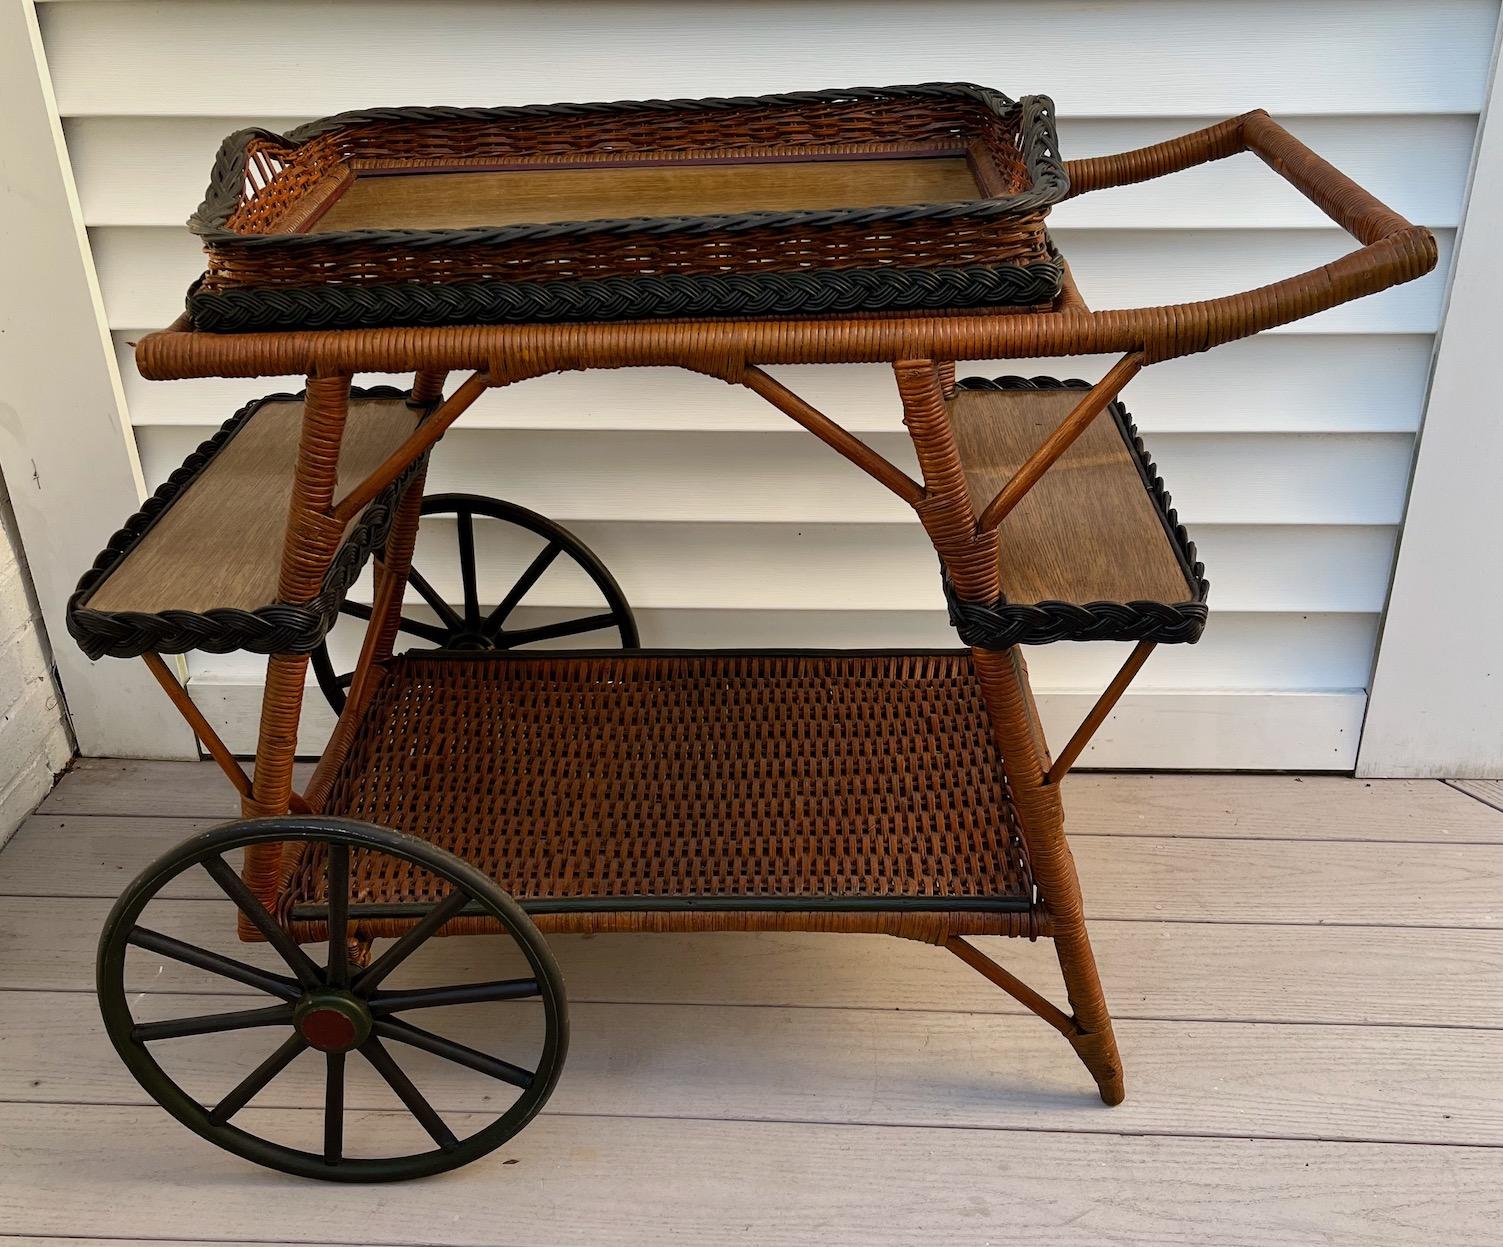 antique tea cart with removable glass tray